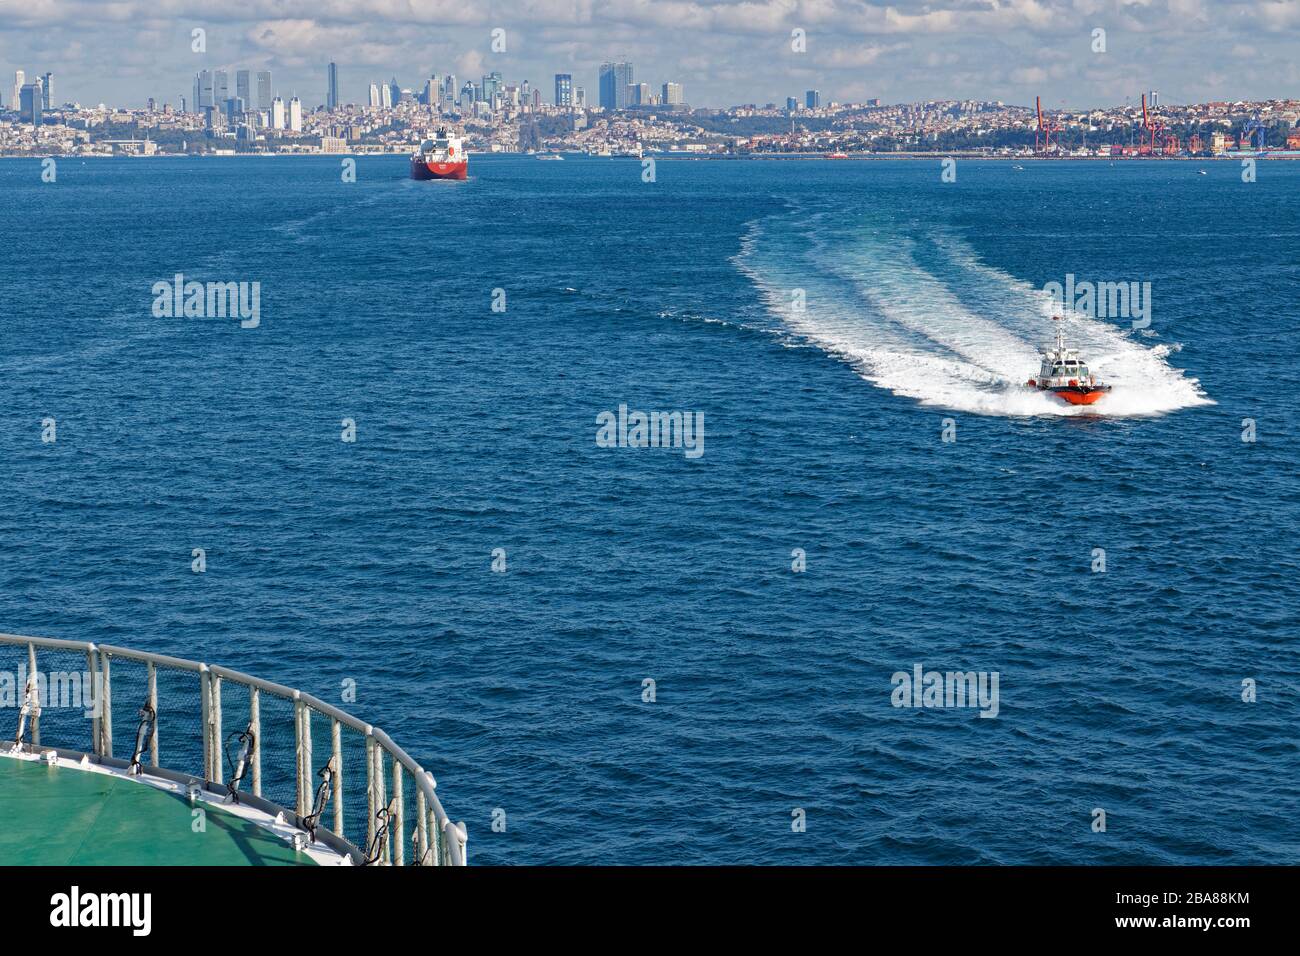 A Turkish Pilot Boat making a fast approach to a Seismic Vessel, about to transit through the Bosphorus Straits Stock Photo